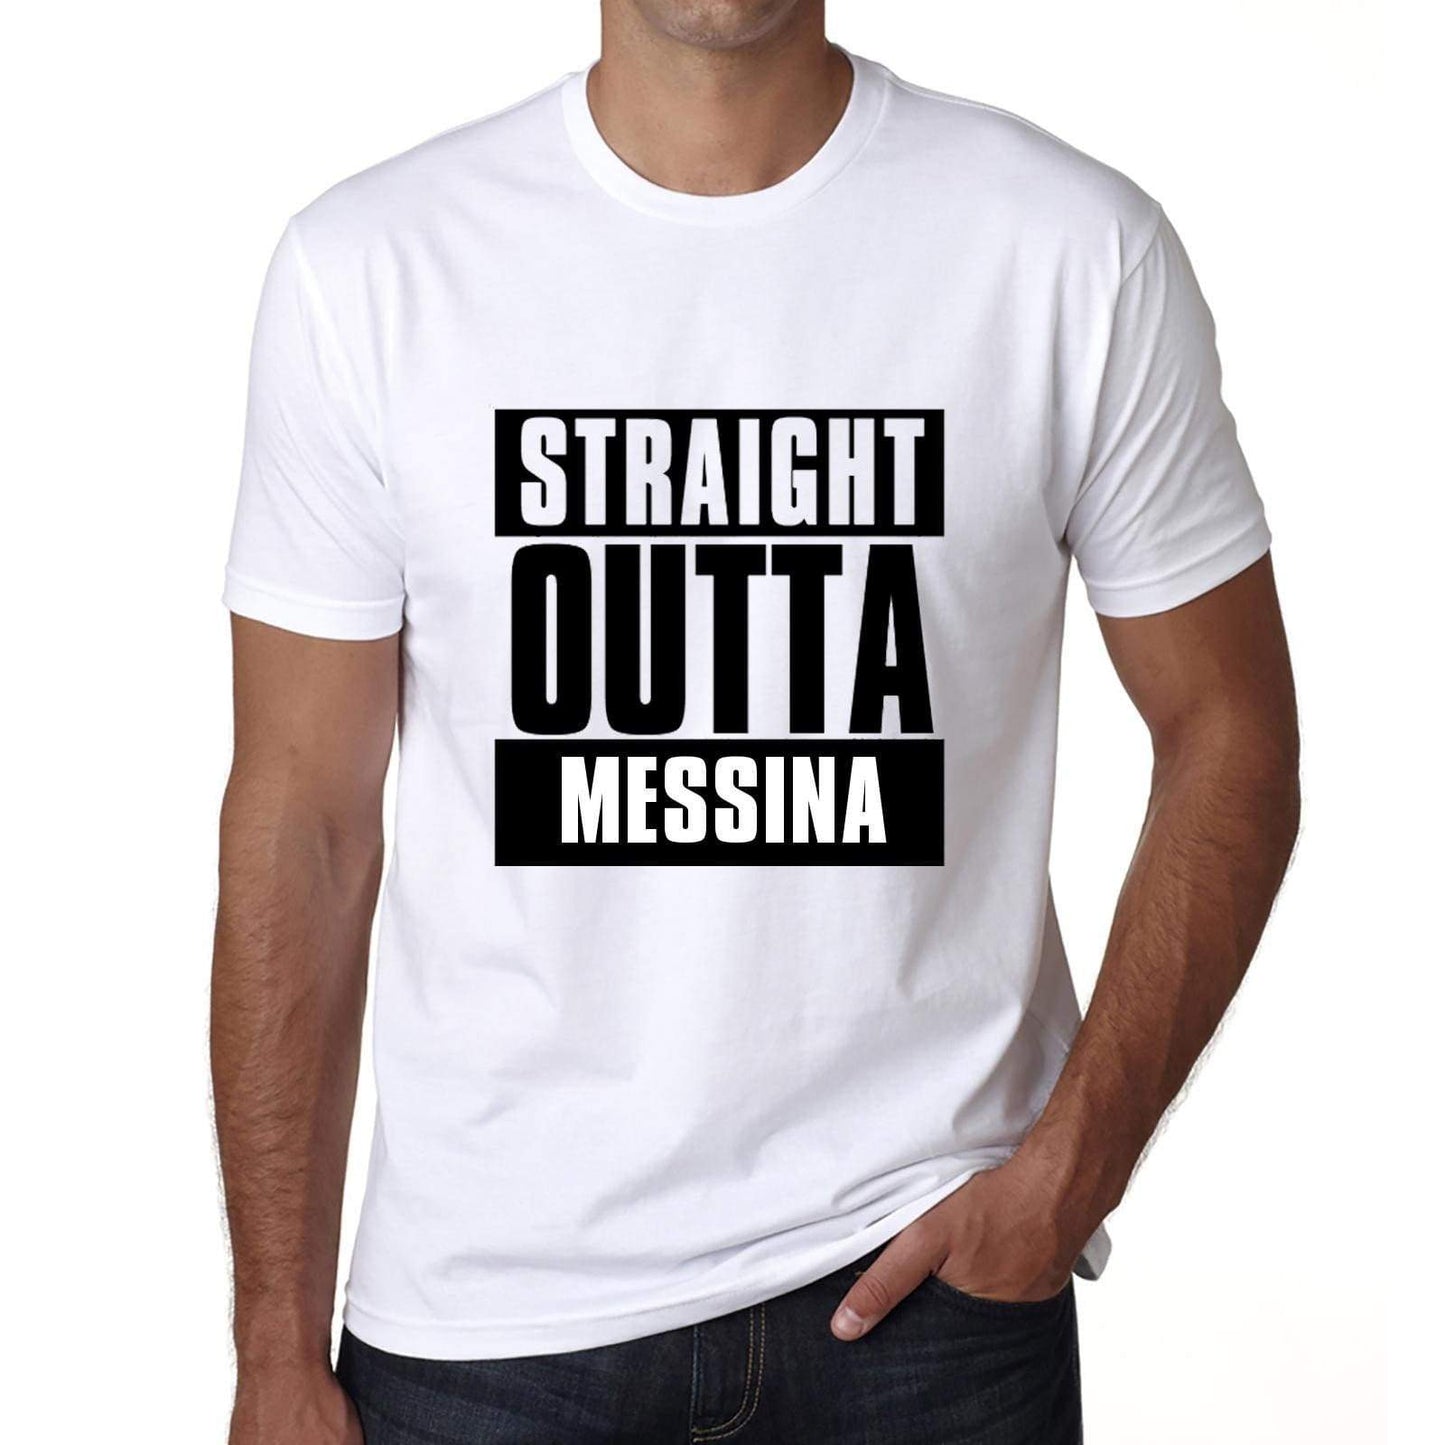 Straight Outta Messina Mens Short Sleeve Round Neck T-Shirt 00027 - White / S - Casual